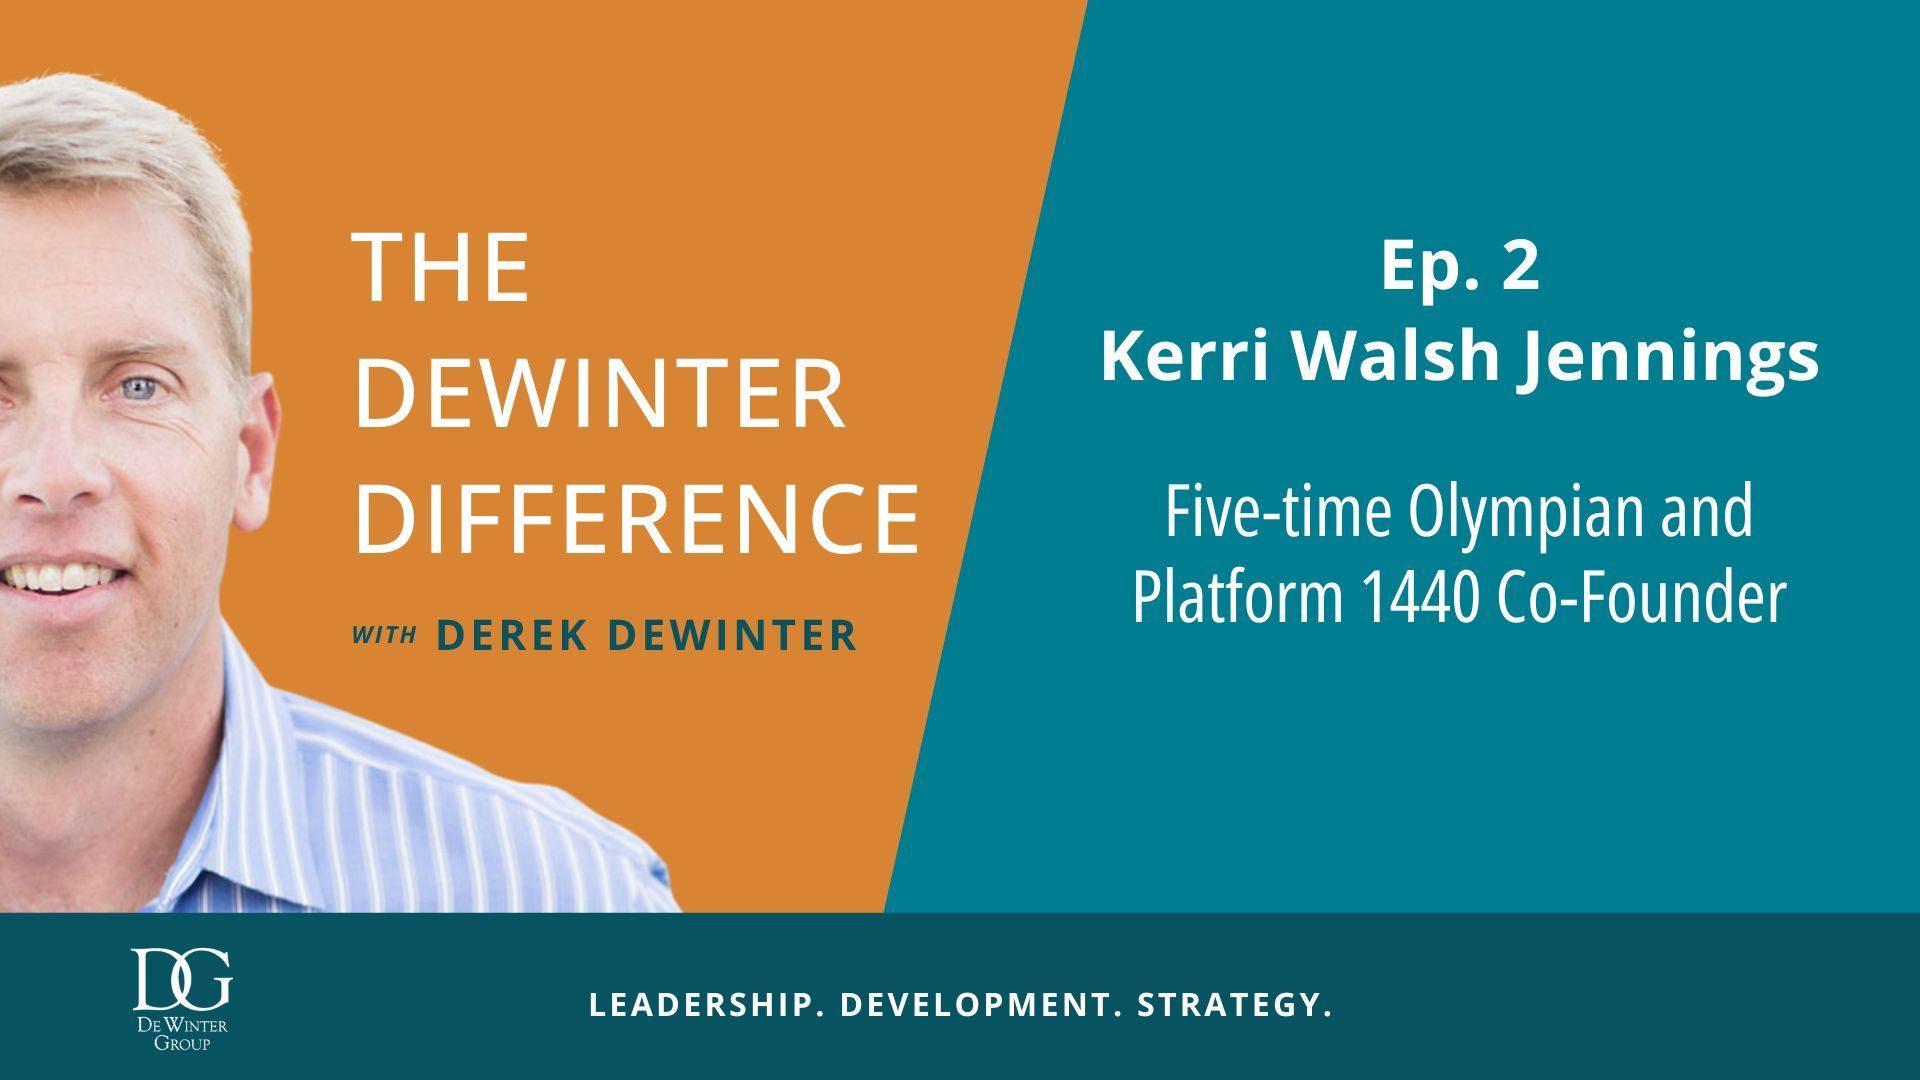 The DeWinter Difference: Kerri Walsh Jennings, Five-Time Olympian and Co-Founder of Platform 1440